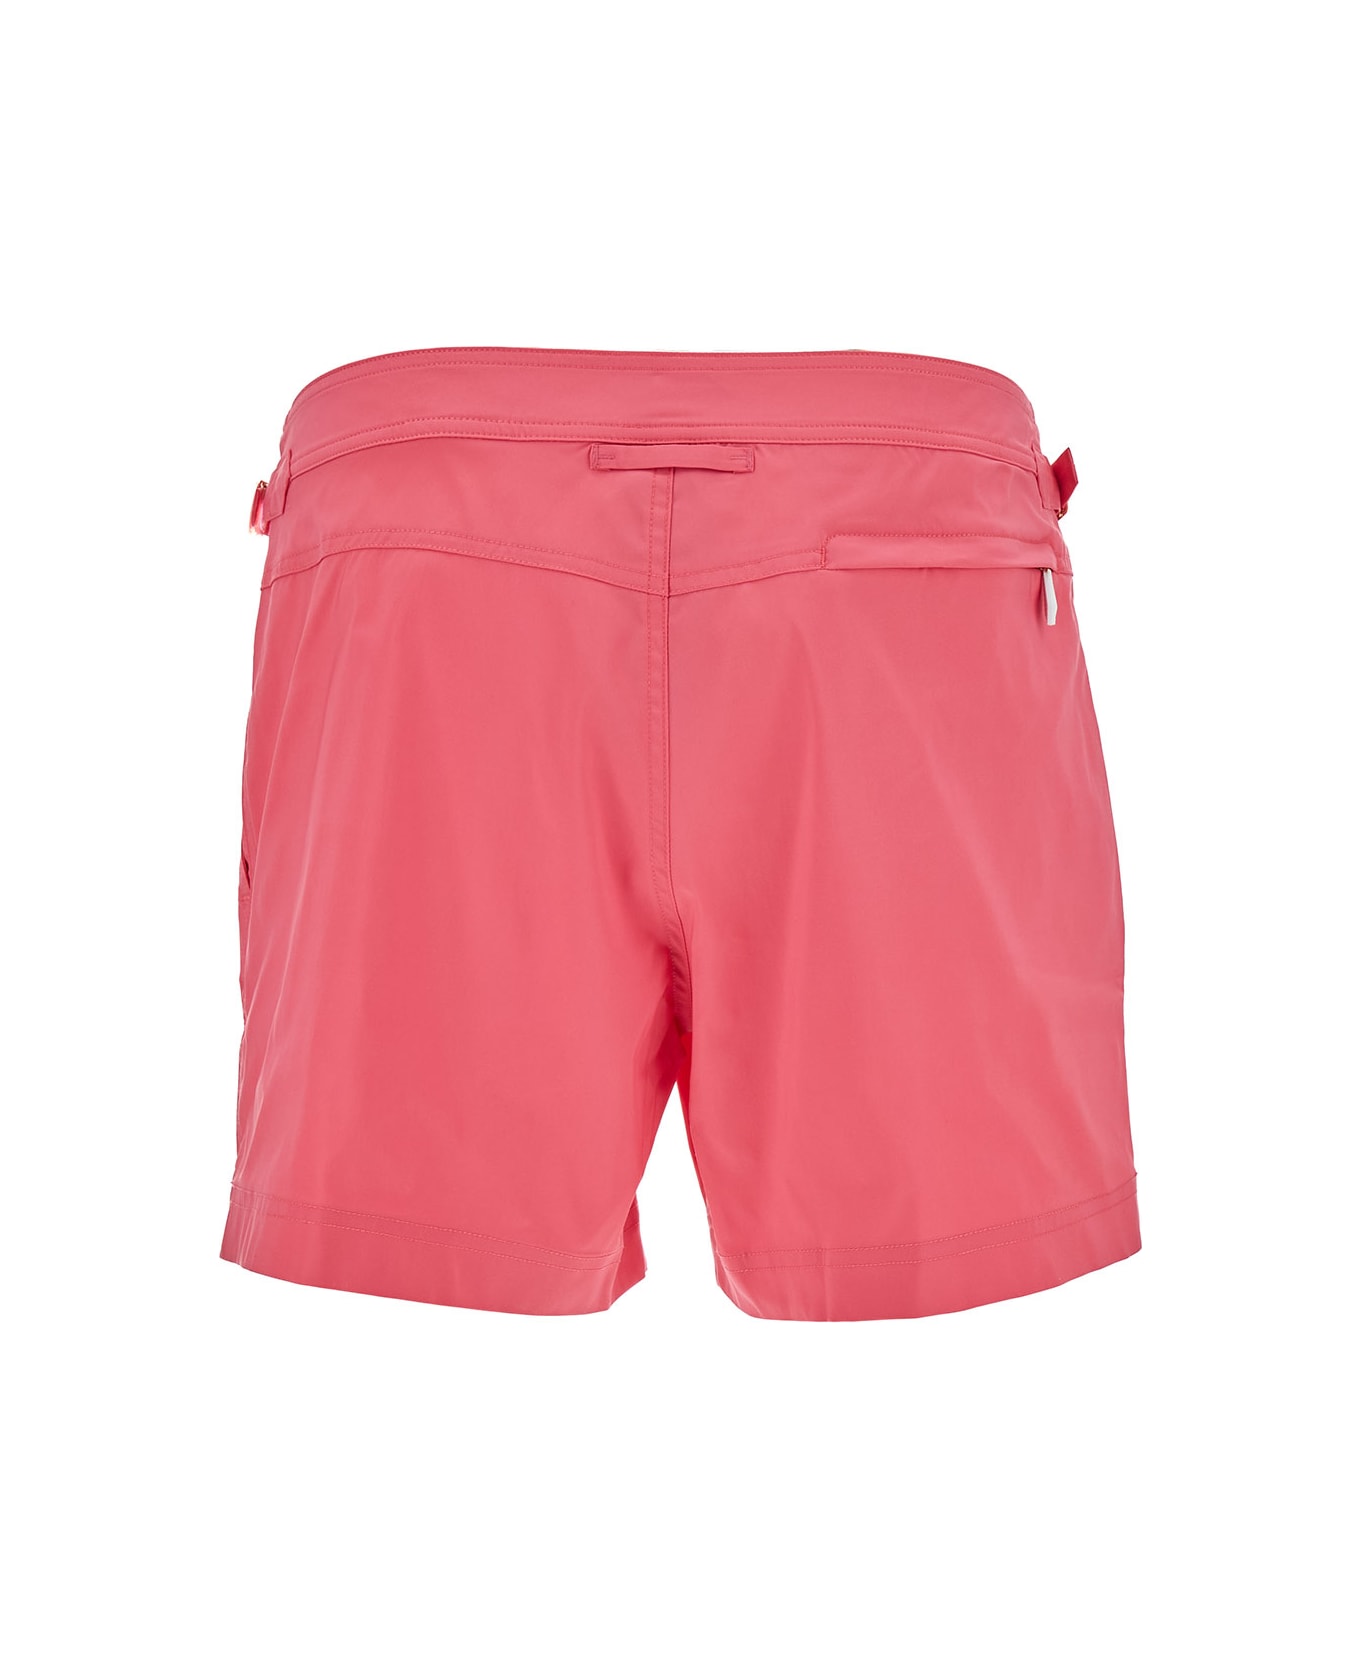 Tom Ford Salmon Pink Swim Shorts With Branded Button In Nylon Man - Fuxia